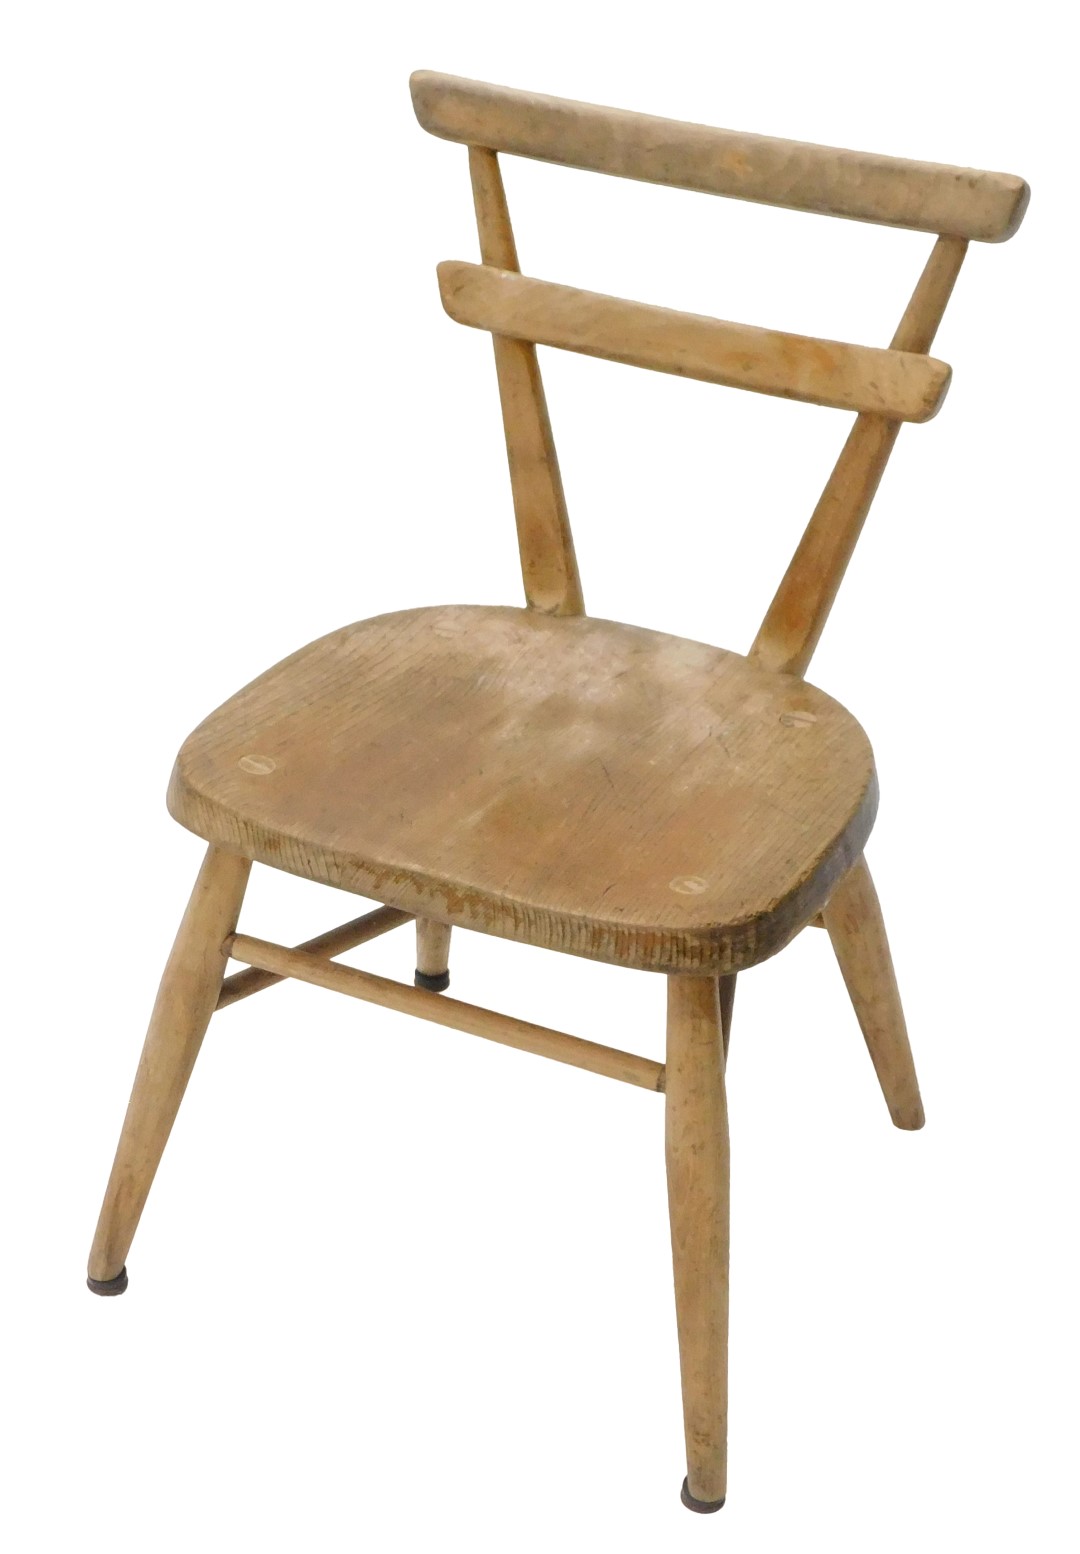 A mid 20thC ash and elm Ercol child's chair, with a tapering back, solid seat, on turned legs, lacki